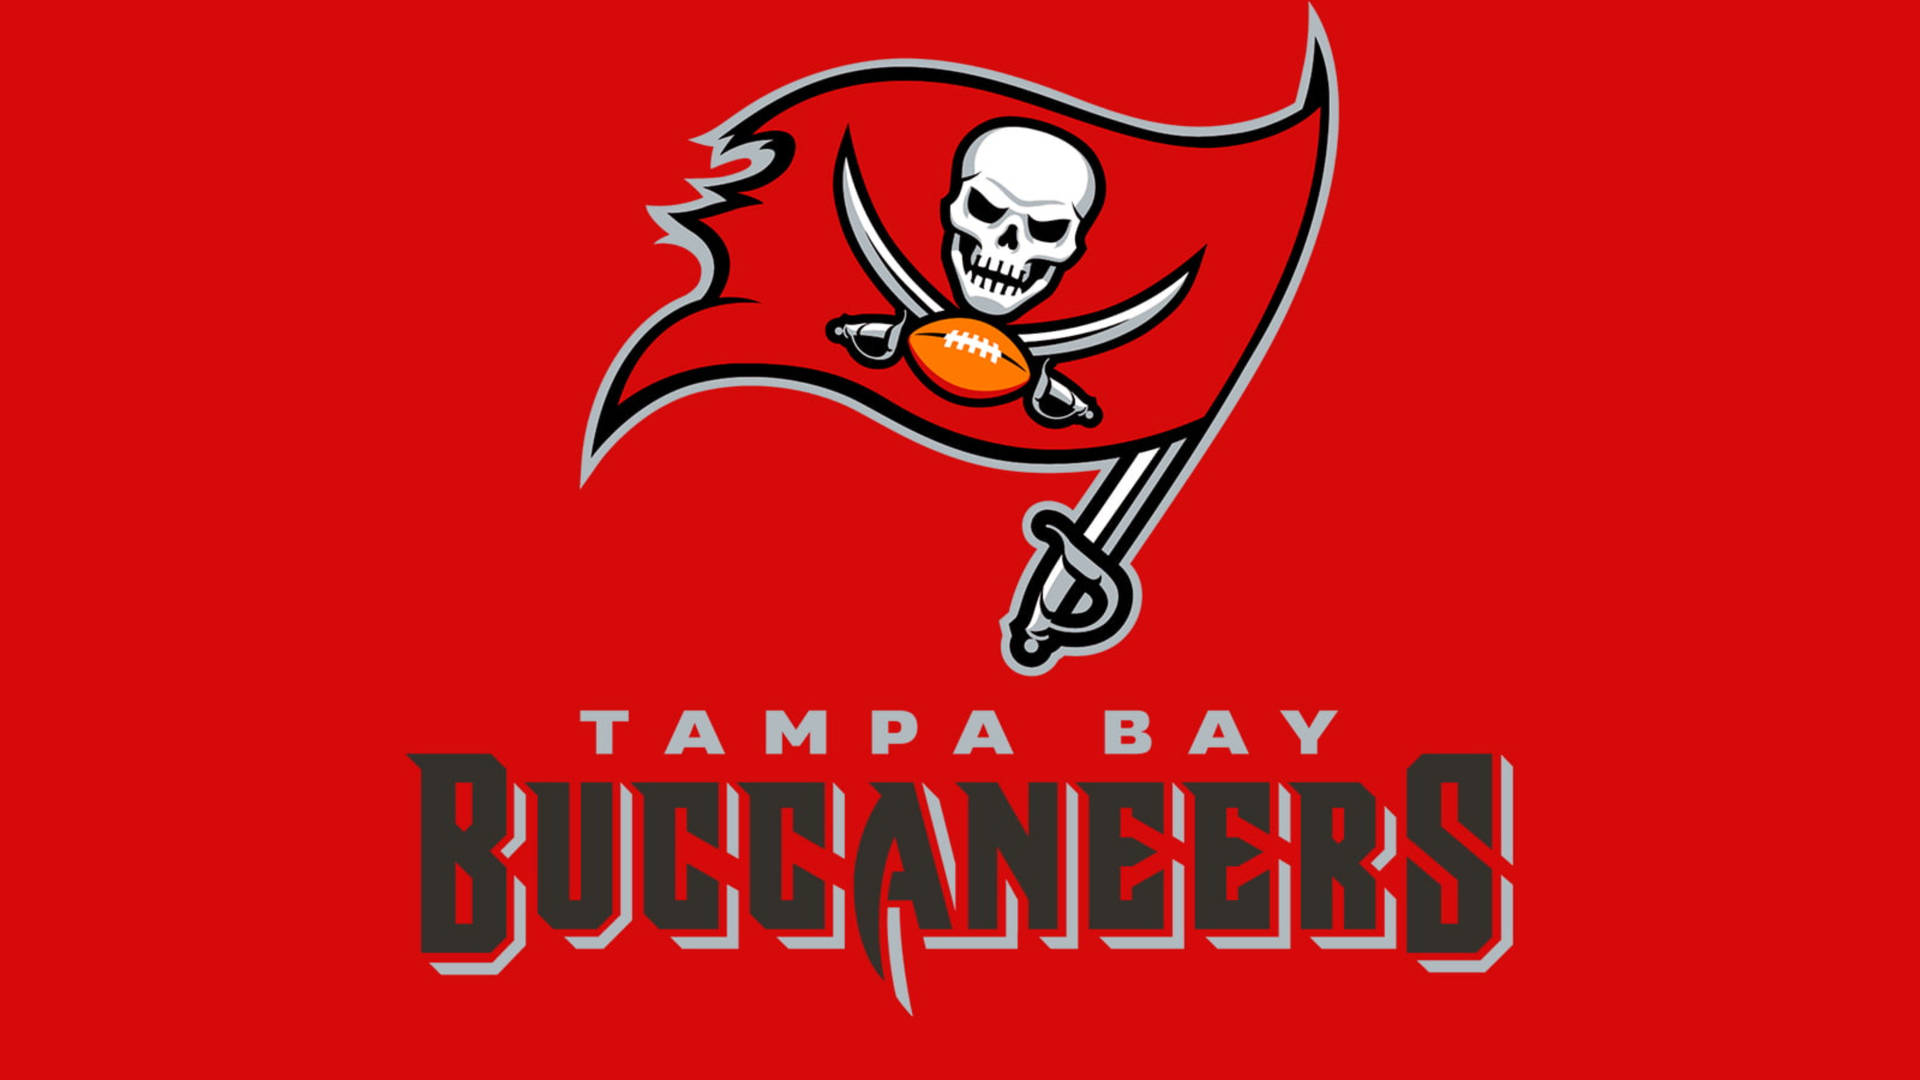 Tampa Bay Buccaneers Name And Logo Background